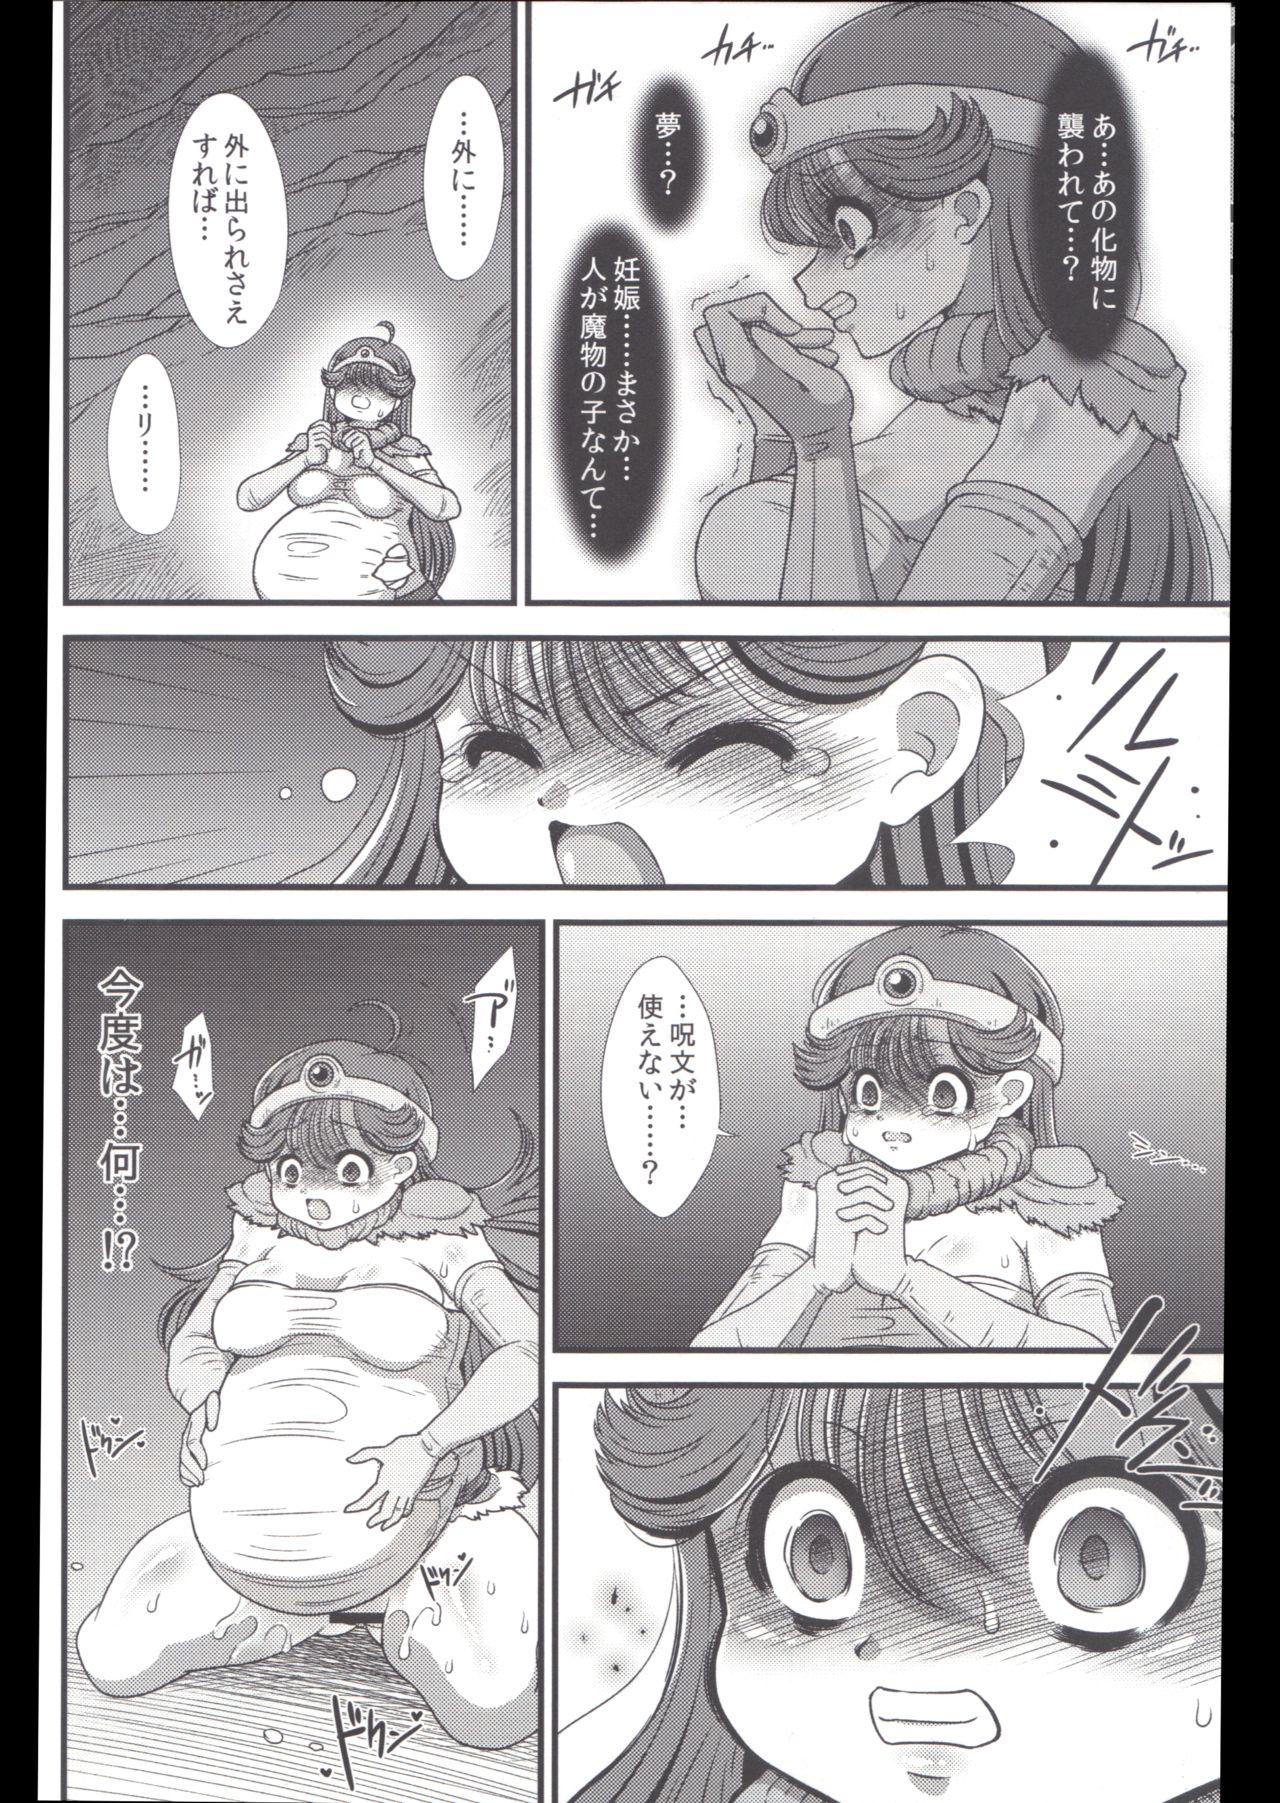 Bisex Toro Ana - Dragon quest iii Sister - Page 5